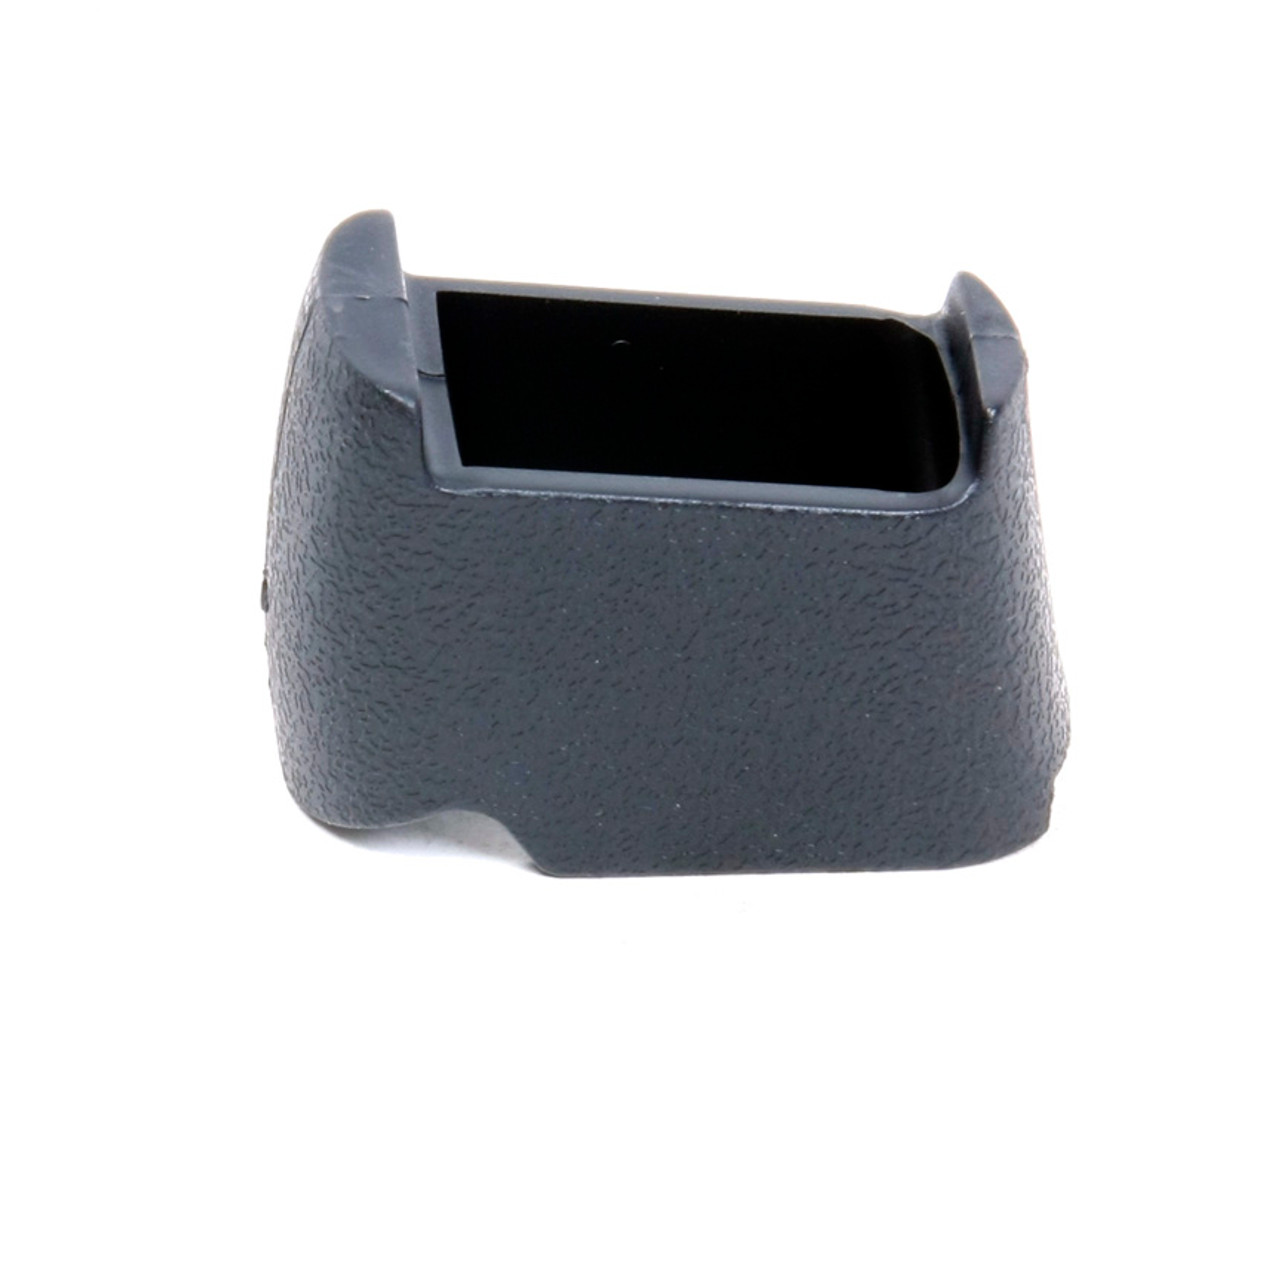 Magazine Spacer for the Glock® (Use 17 / 22 Magazines in 26 / 27 Pistols) - Black Polymer